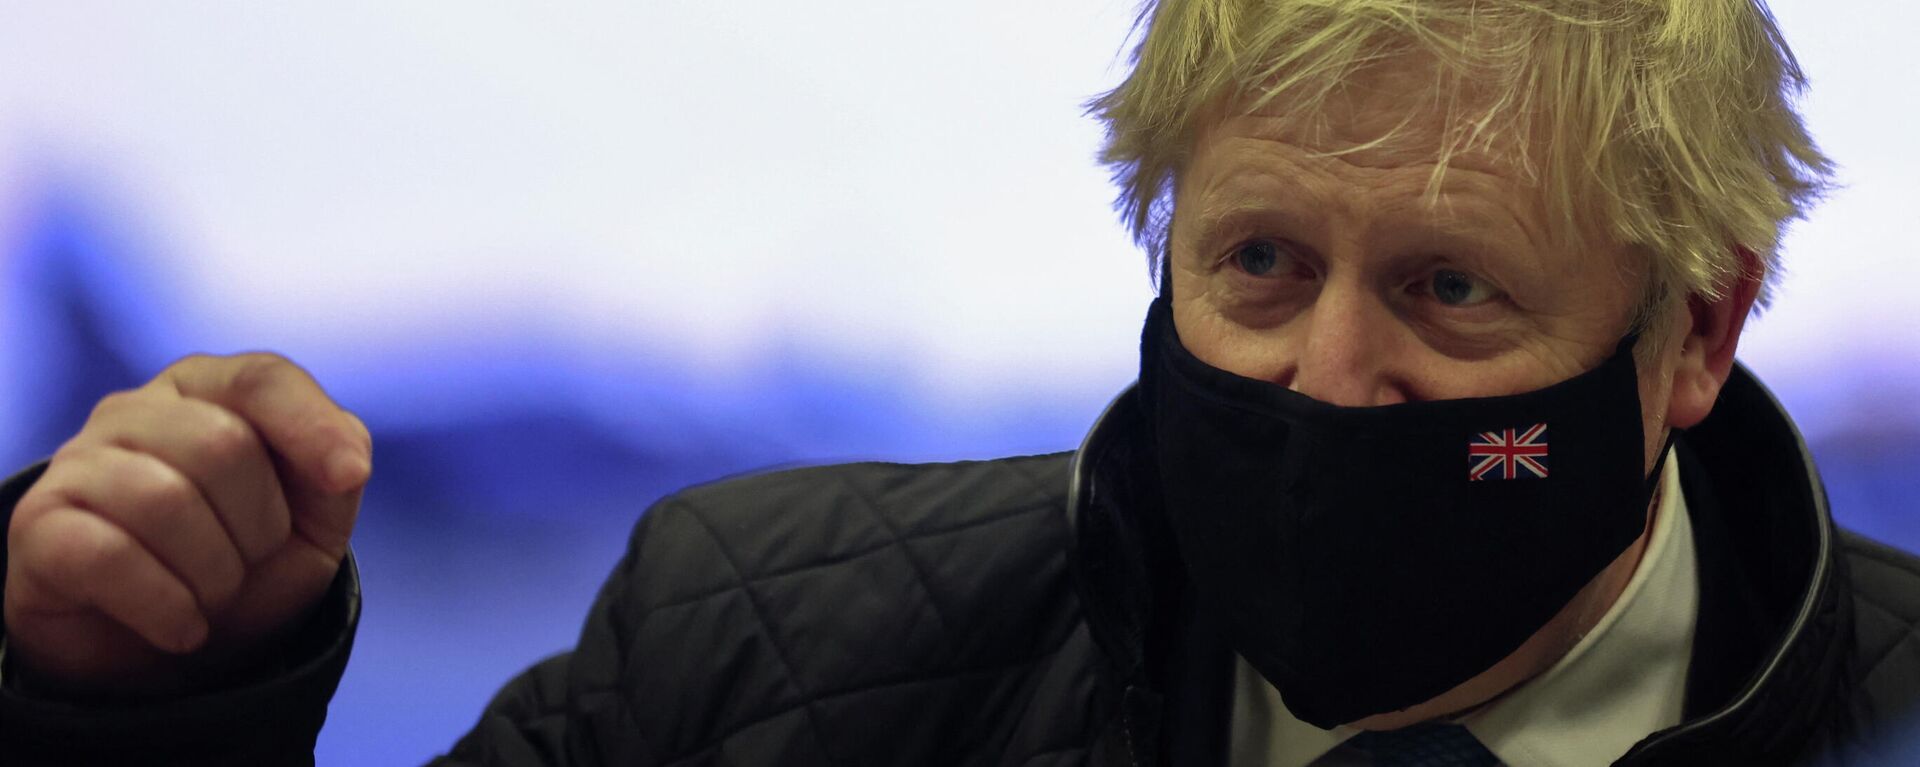 British Prime Minister Boris Johnson gestures during a visit at RAF Valley in Anglesey, Britain January 27, 2022 - Sputnik International, 1920, 31.01.2022